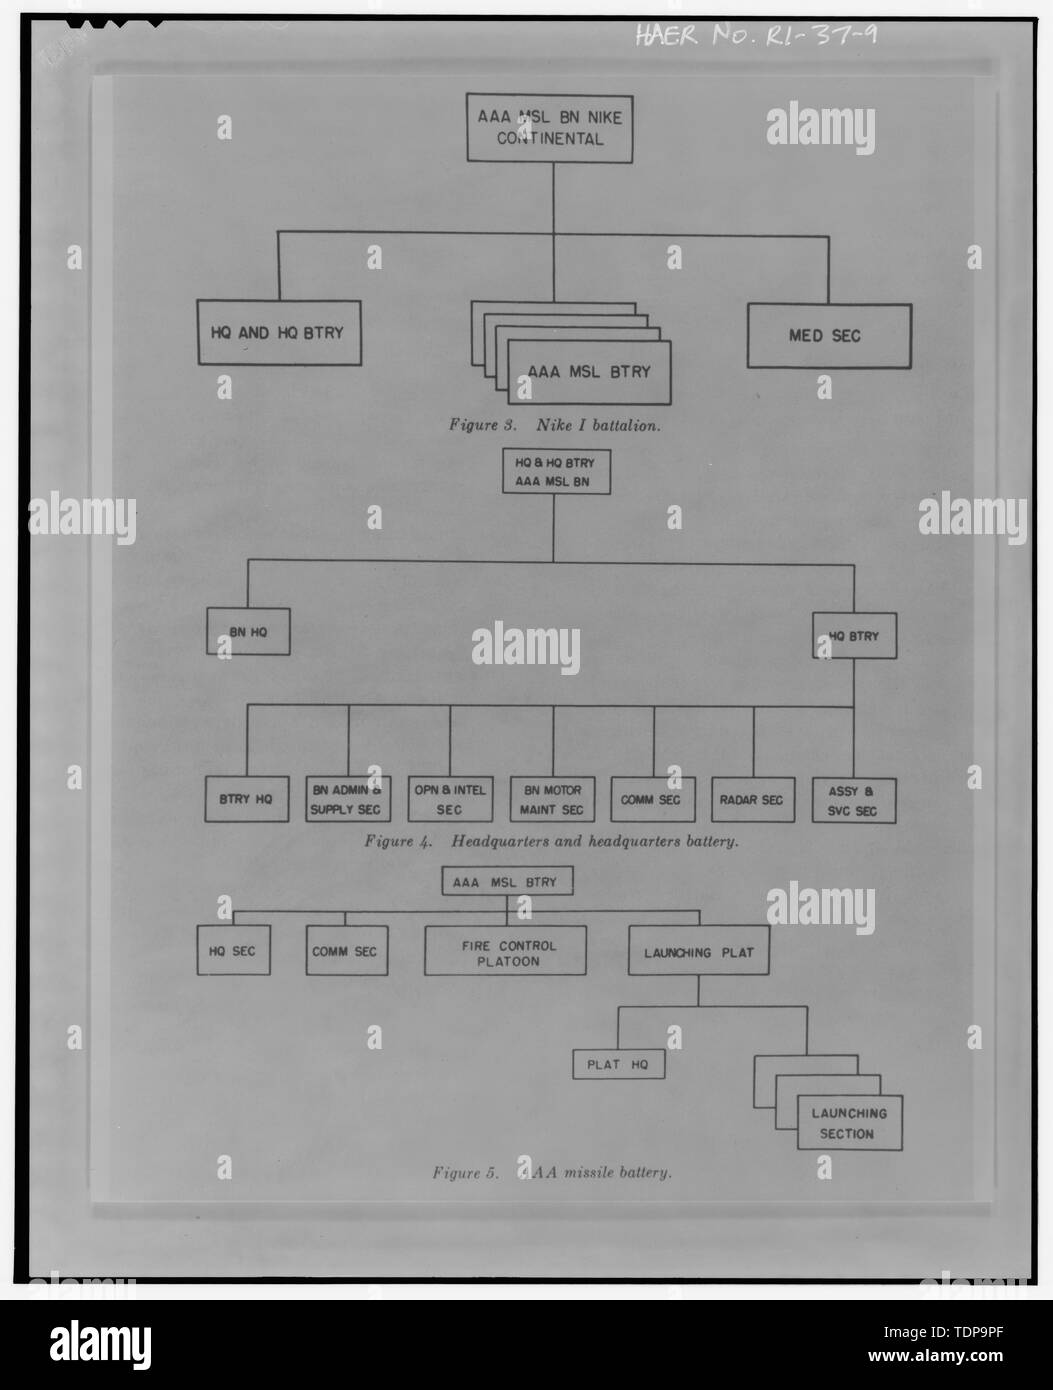 Photocopy of command flow chart of NIKE Battalion, Headquarters Battery and  Missile Battery from Procedures and Drills for NIKE Ajax System, Department  of the Army Field Manual, FM-44-80 from Institute for Military